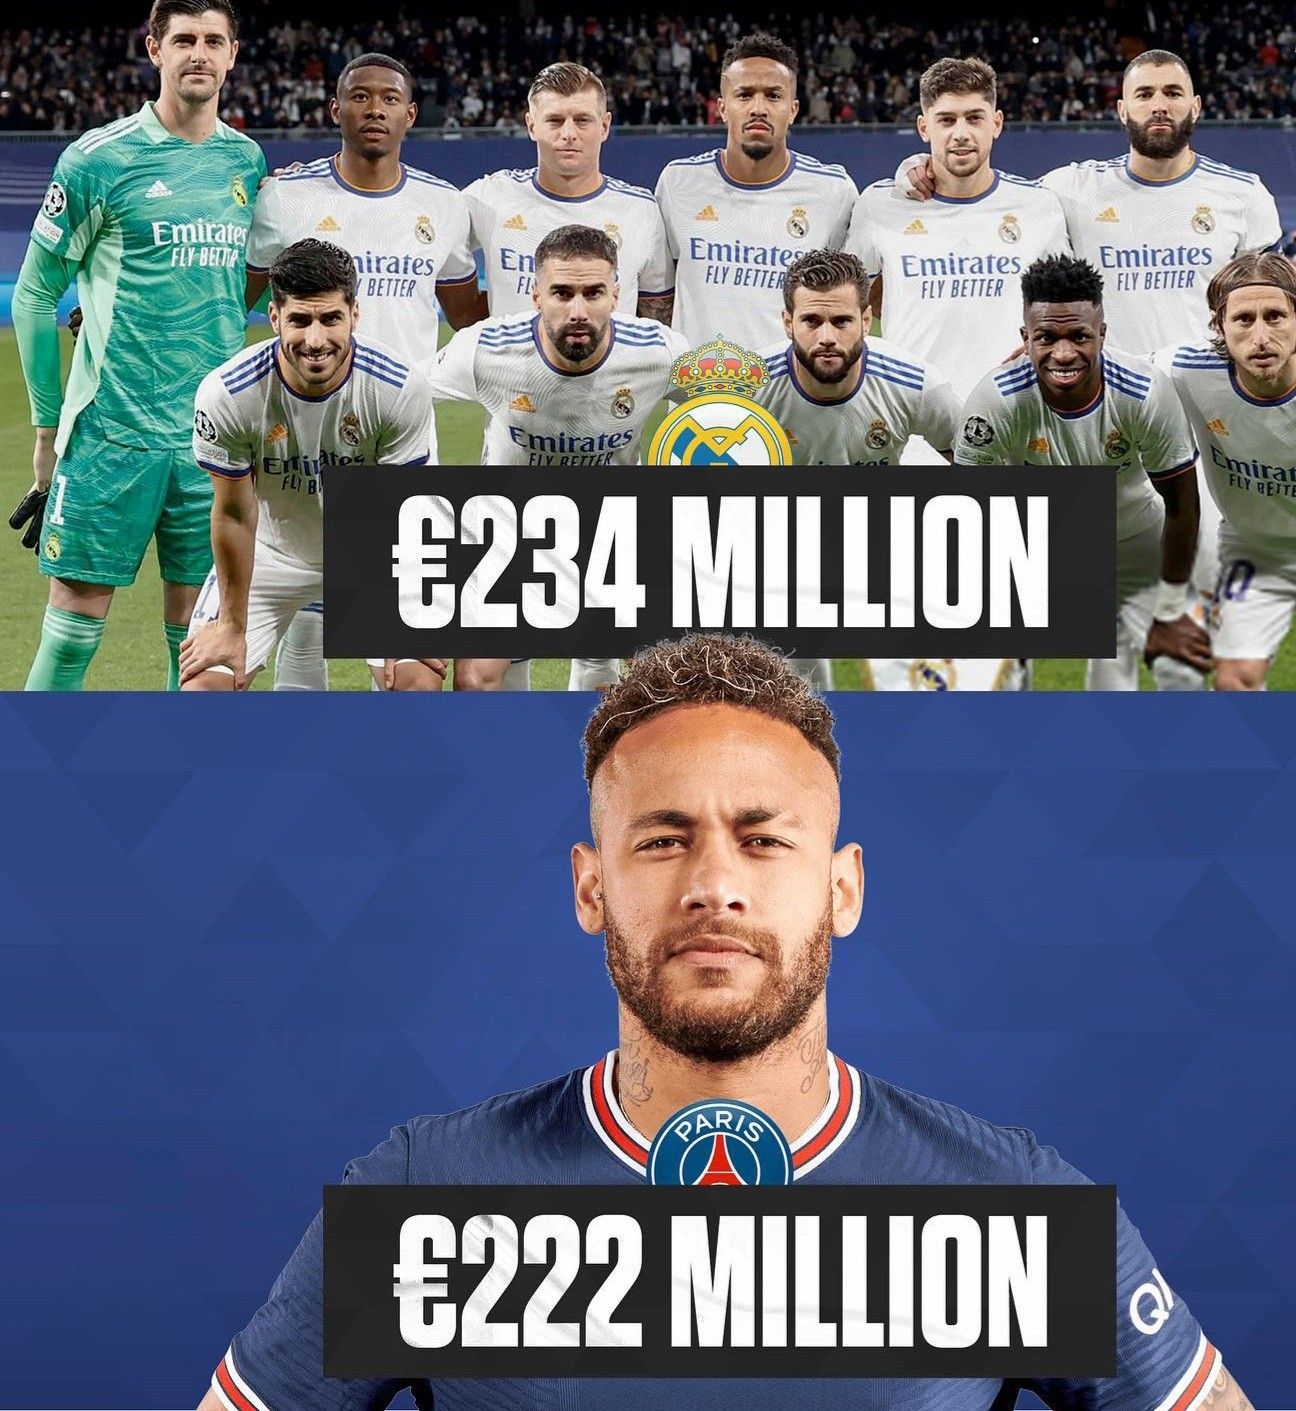 , Ligue1 REMARKABLE numbers to say the least…🤡💵|Pinterest